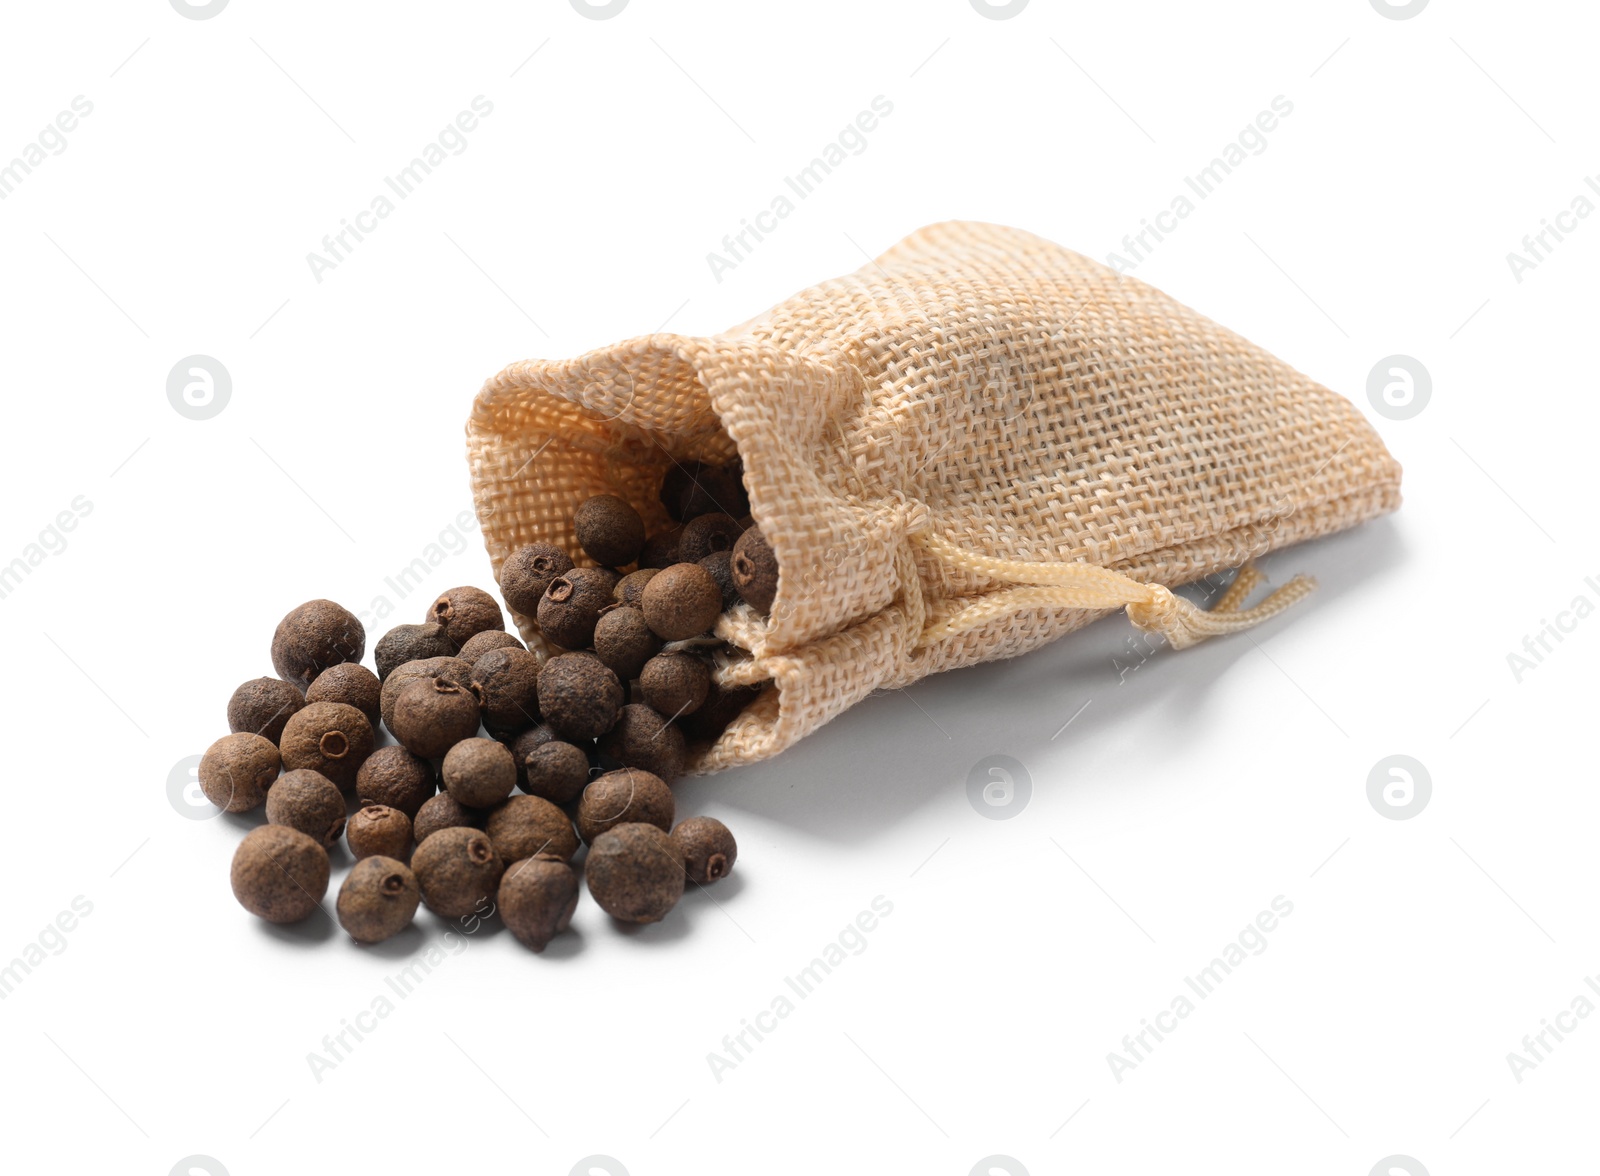 Photo of Dry allspice berries (Jamaica pepper) in bag isolated on white